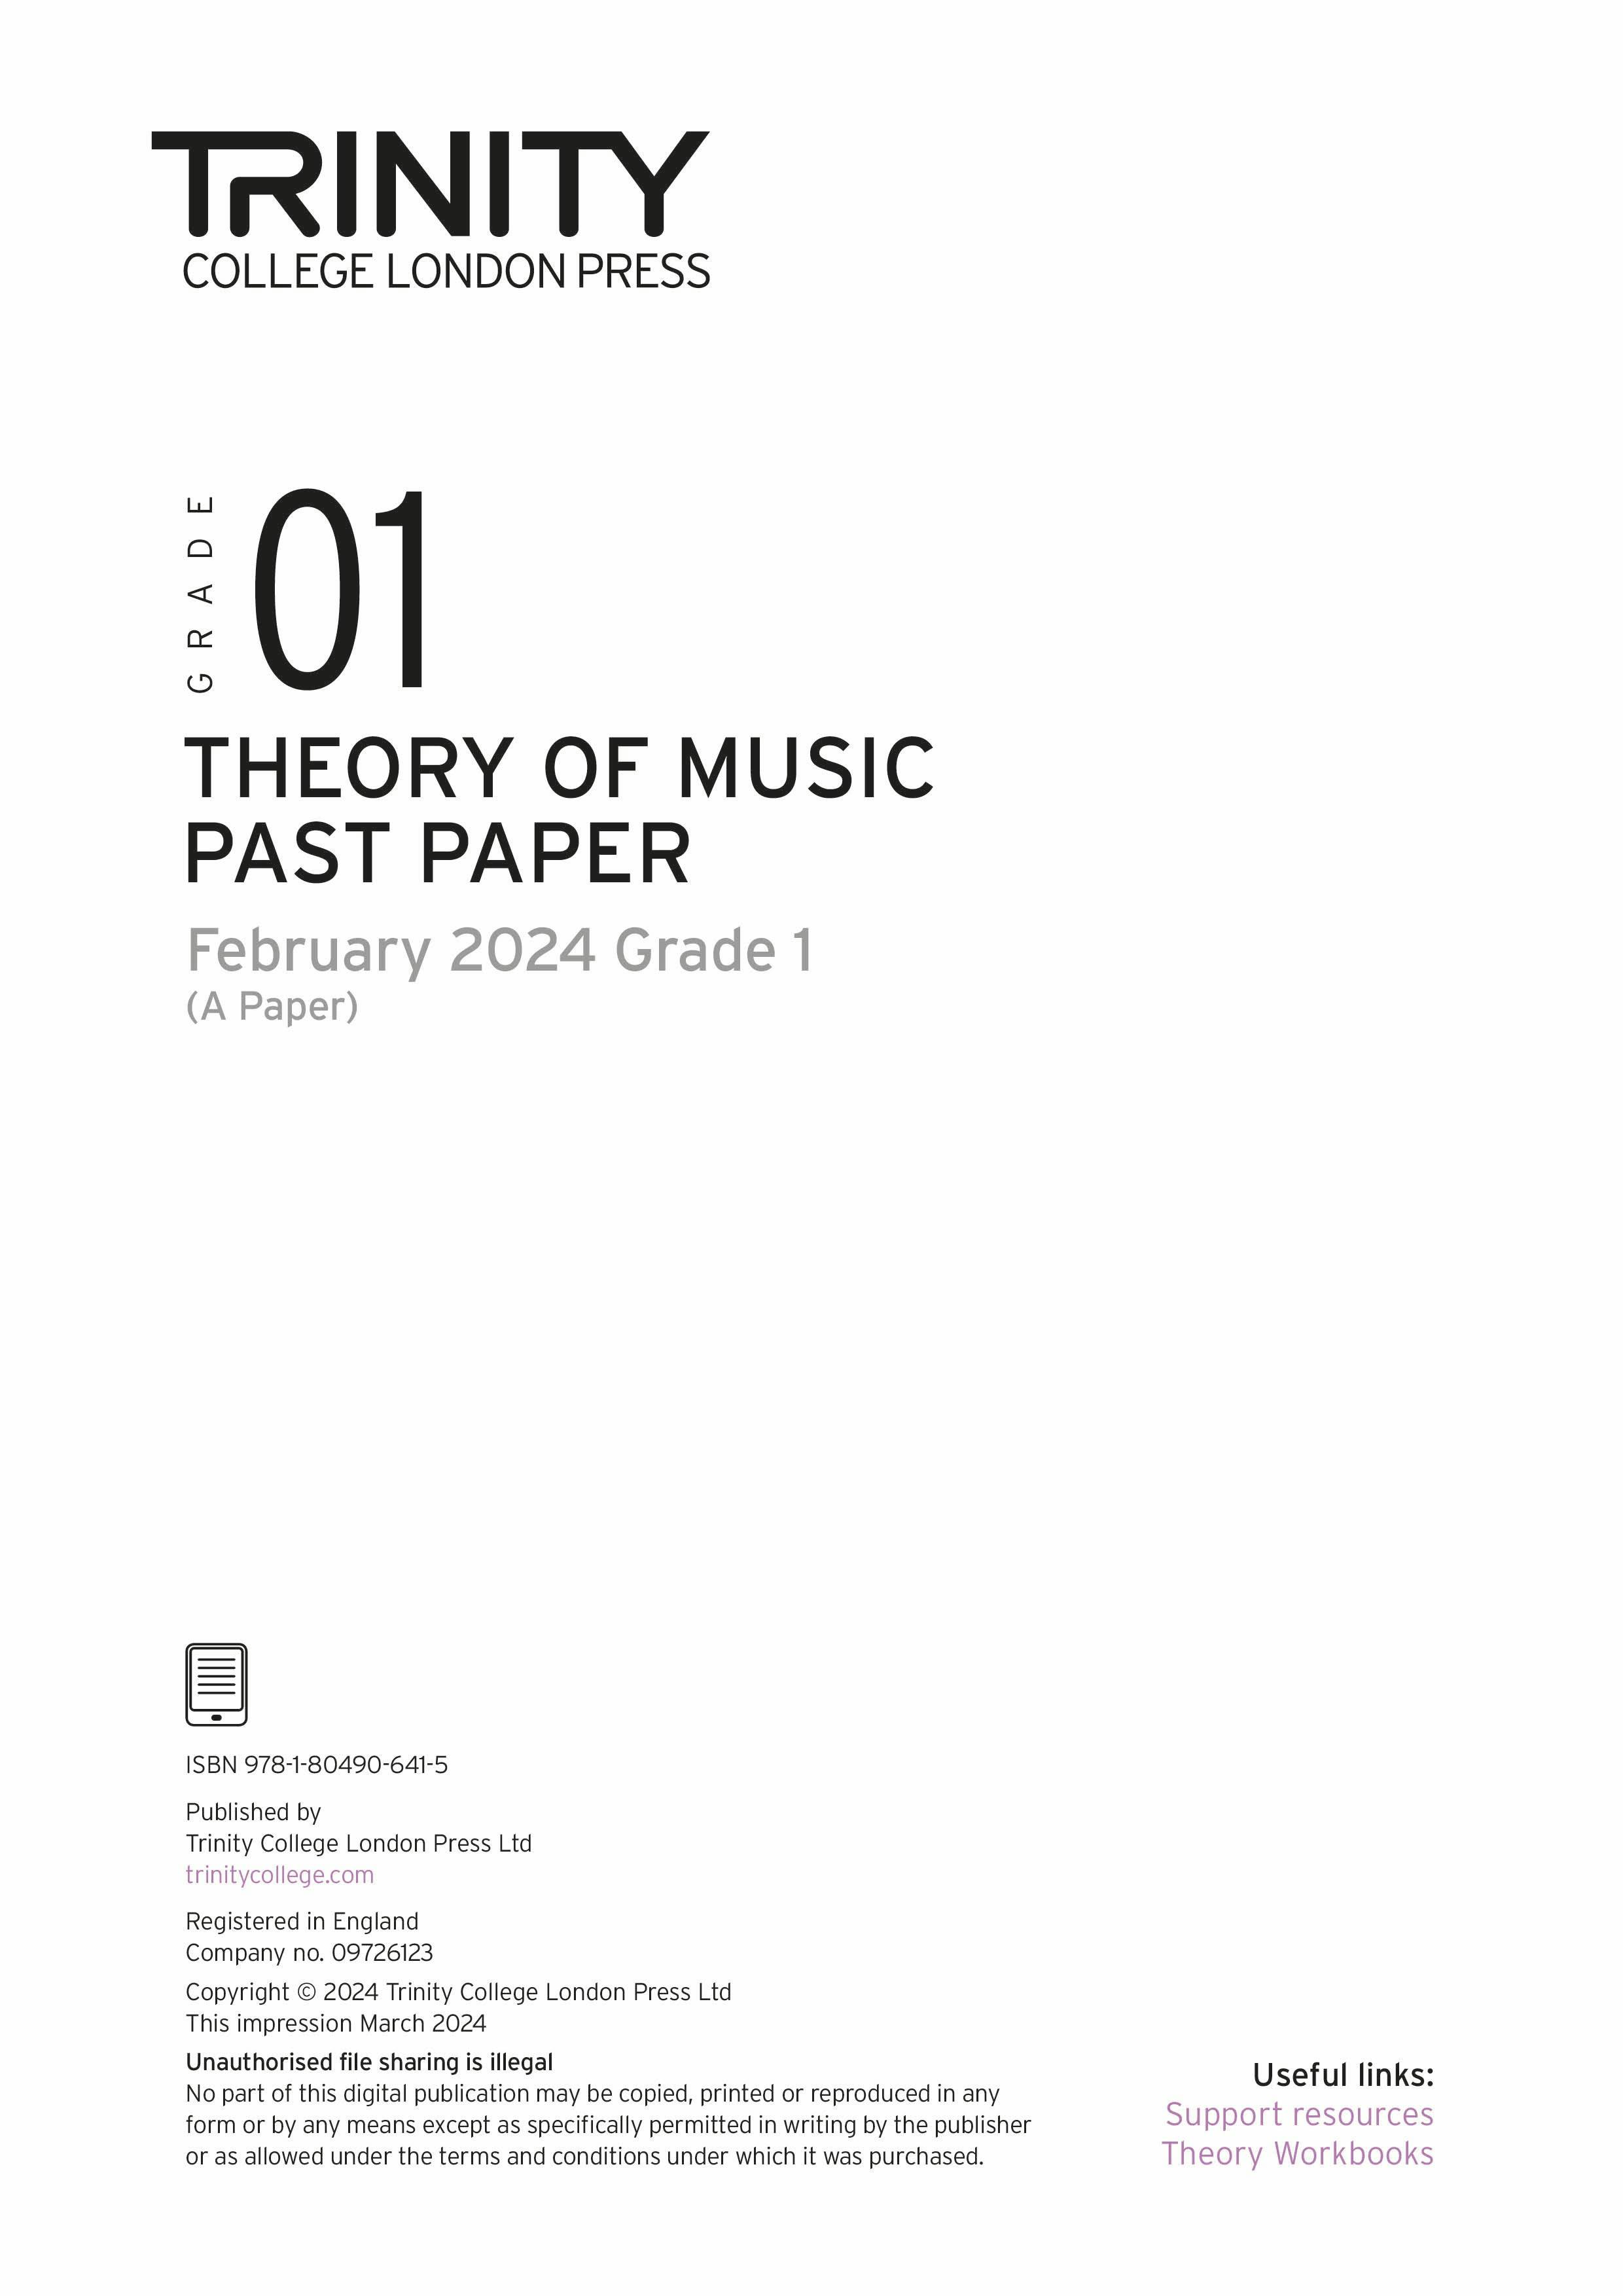 Theory of Music Past Paper 2024 February A: Grade 1 - ebook